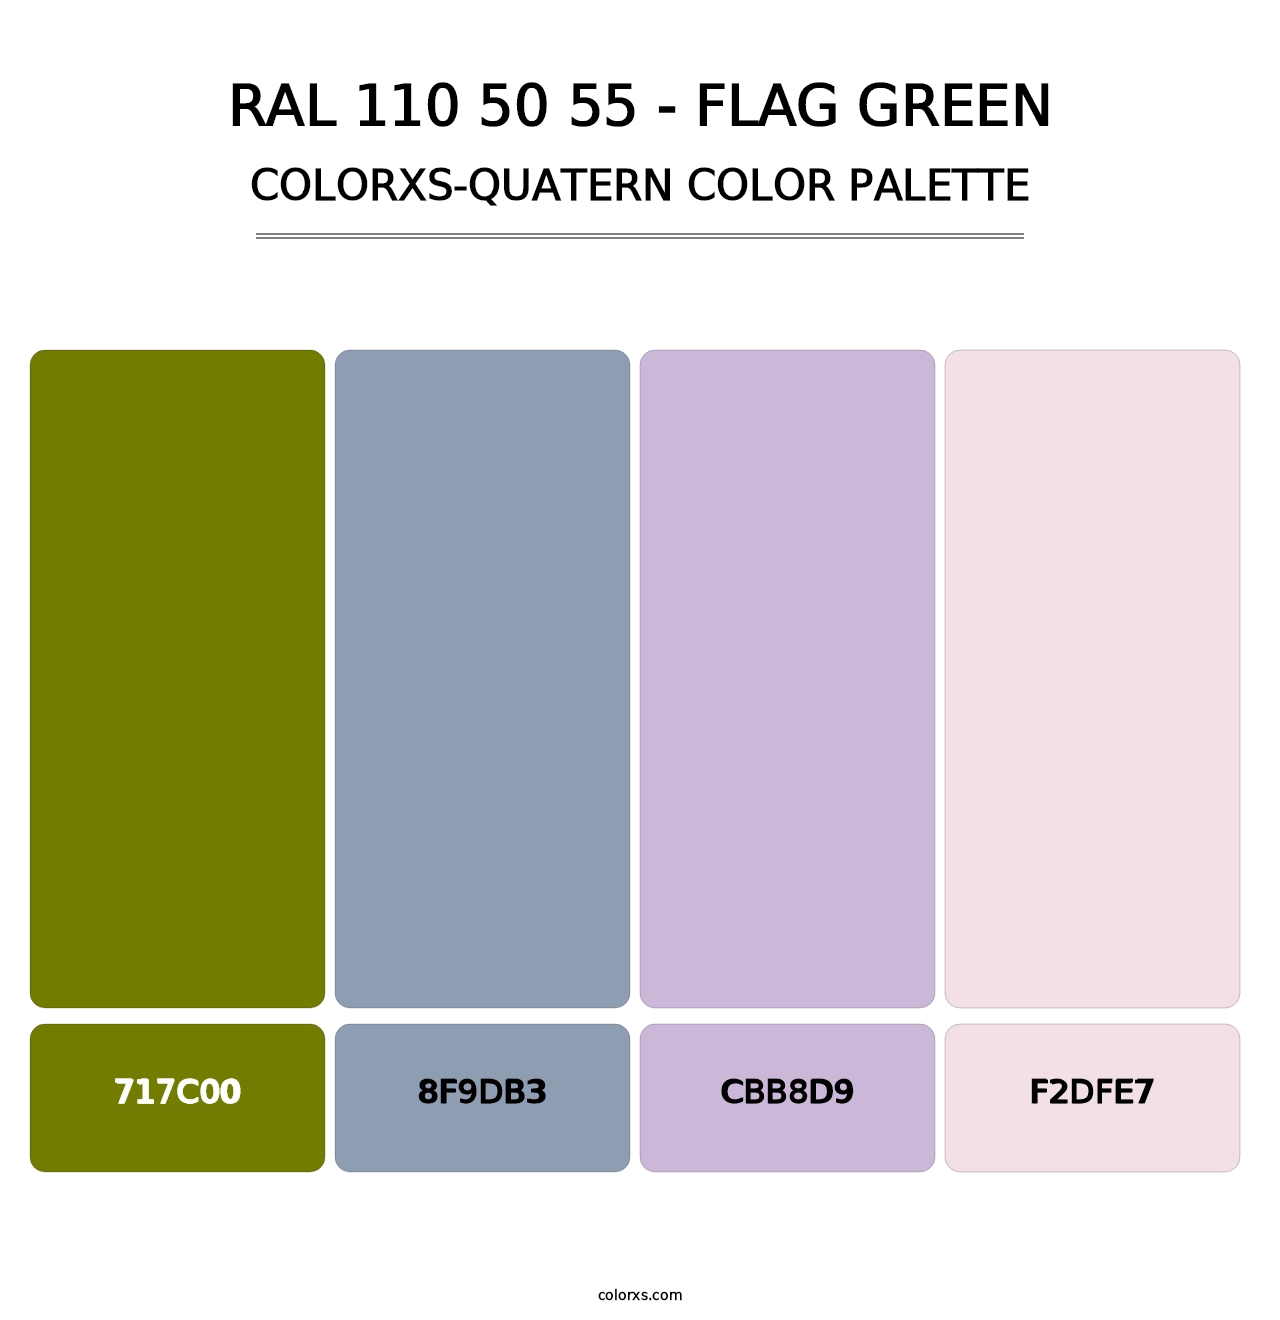 RAL 110 50 55 - Flag Green - Colorxs Quatern Palette